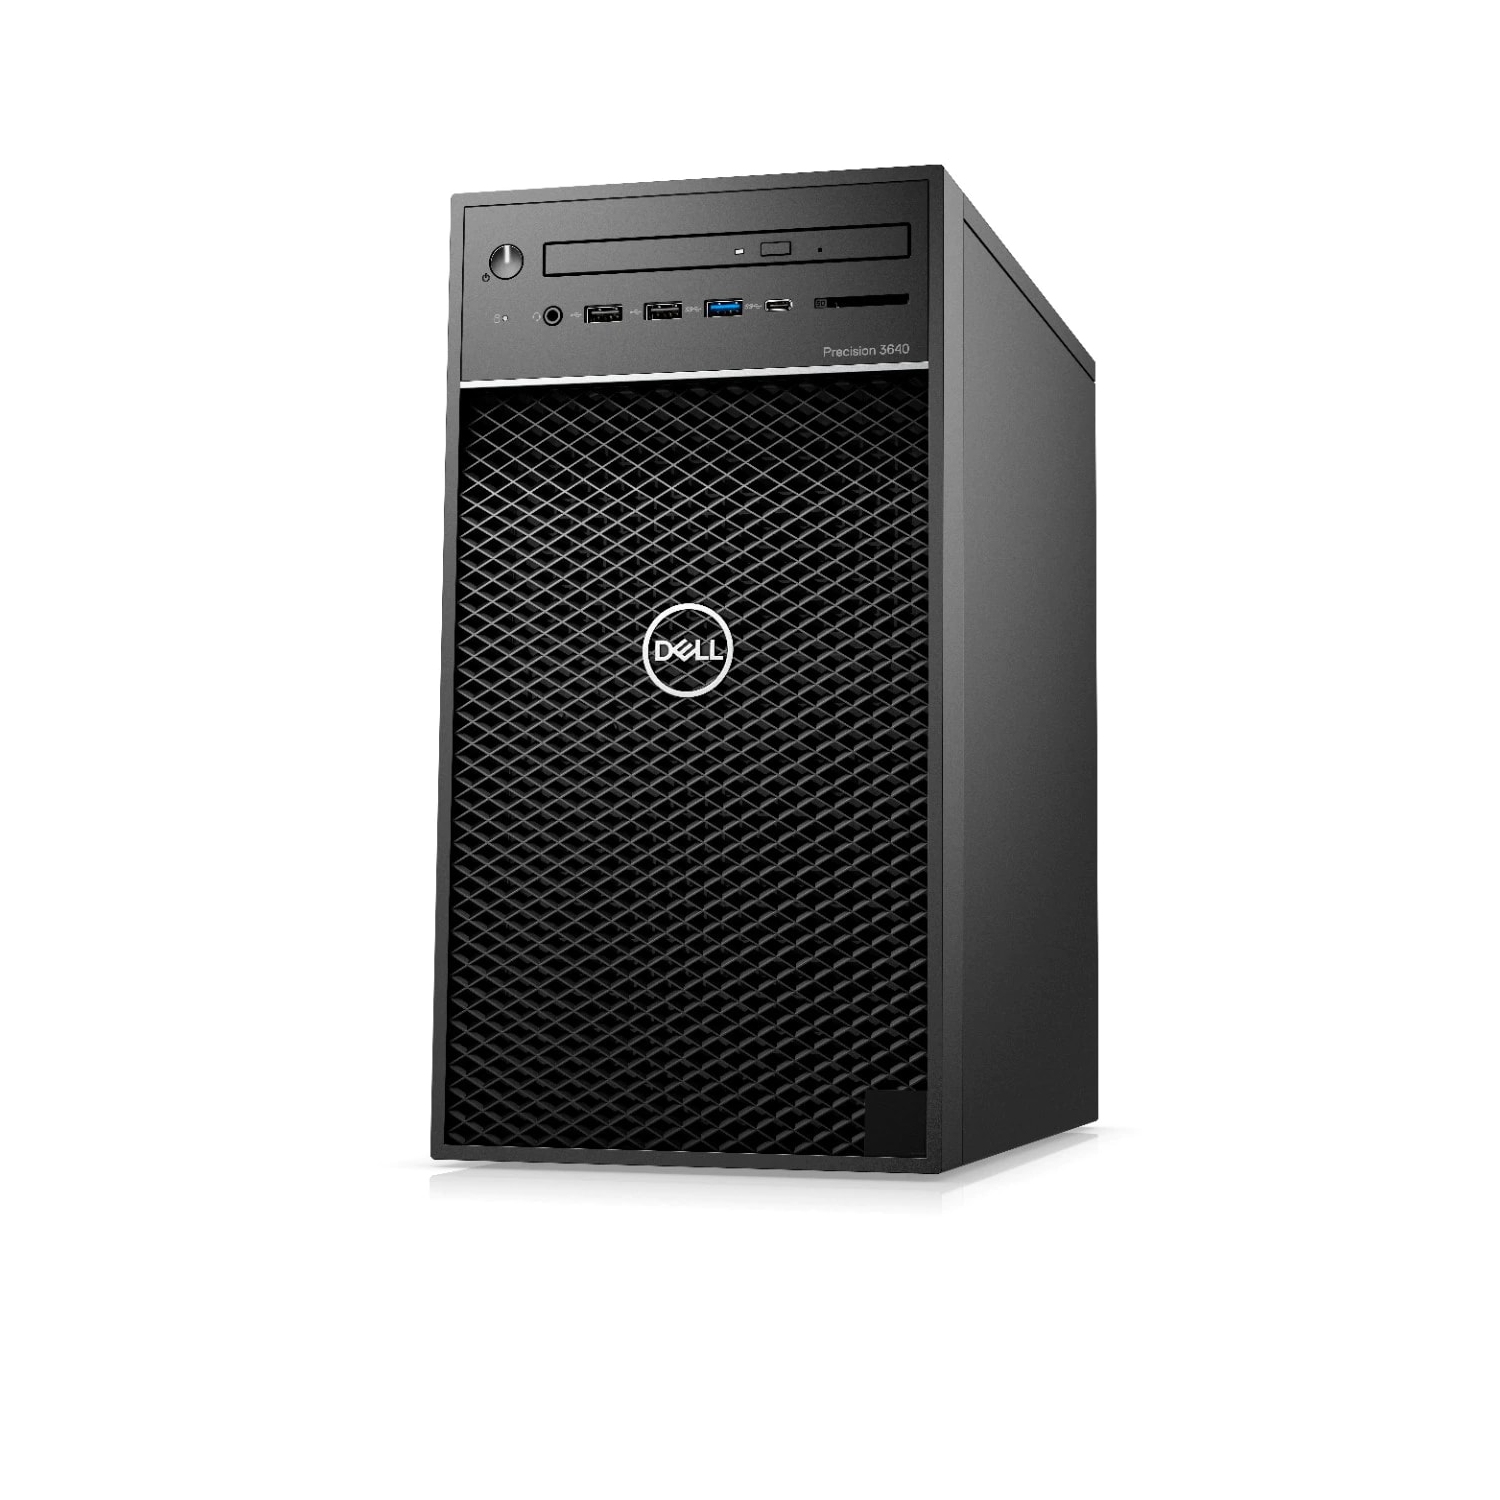 Refurbished (Excellent) - Dell Precision T3640 Workstation Desktop (2018), Core i9, 1TB SSD, 64GB RAM, RTX 5000, 10 Cores @ 5.3 GHz, 10th Gen CPU Certified Refurbished